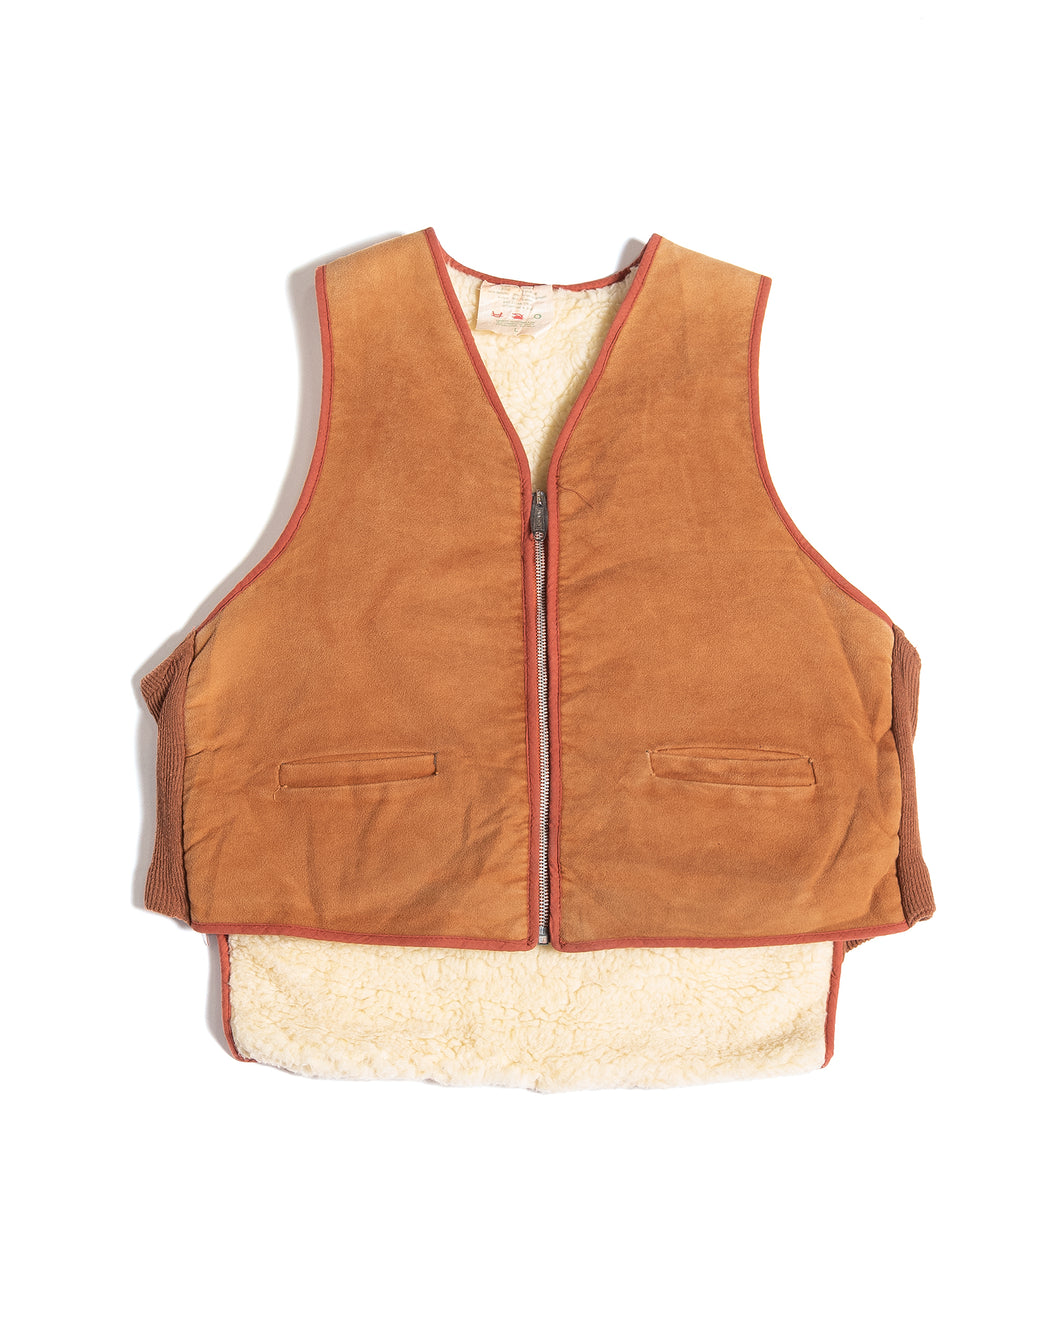 1960s Chamois Vest with Fleece Lining, large